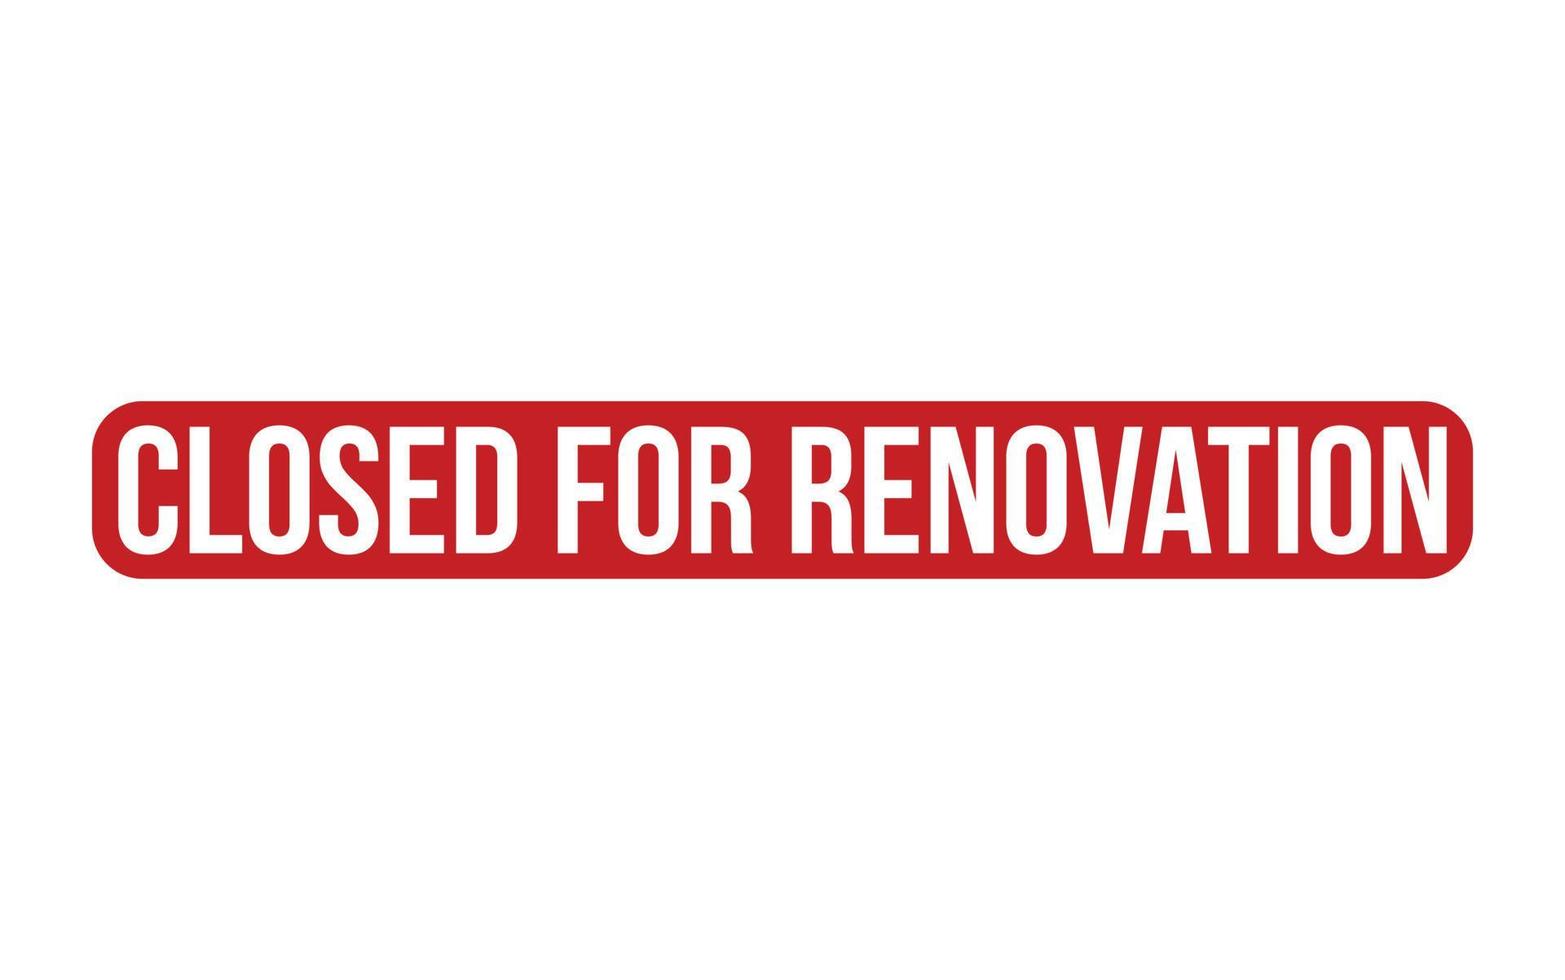 Red Closed for Renovation Rubber Stamp Seal Vector